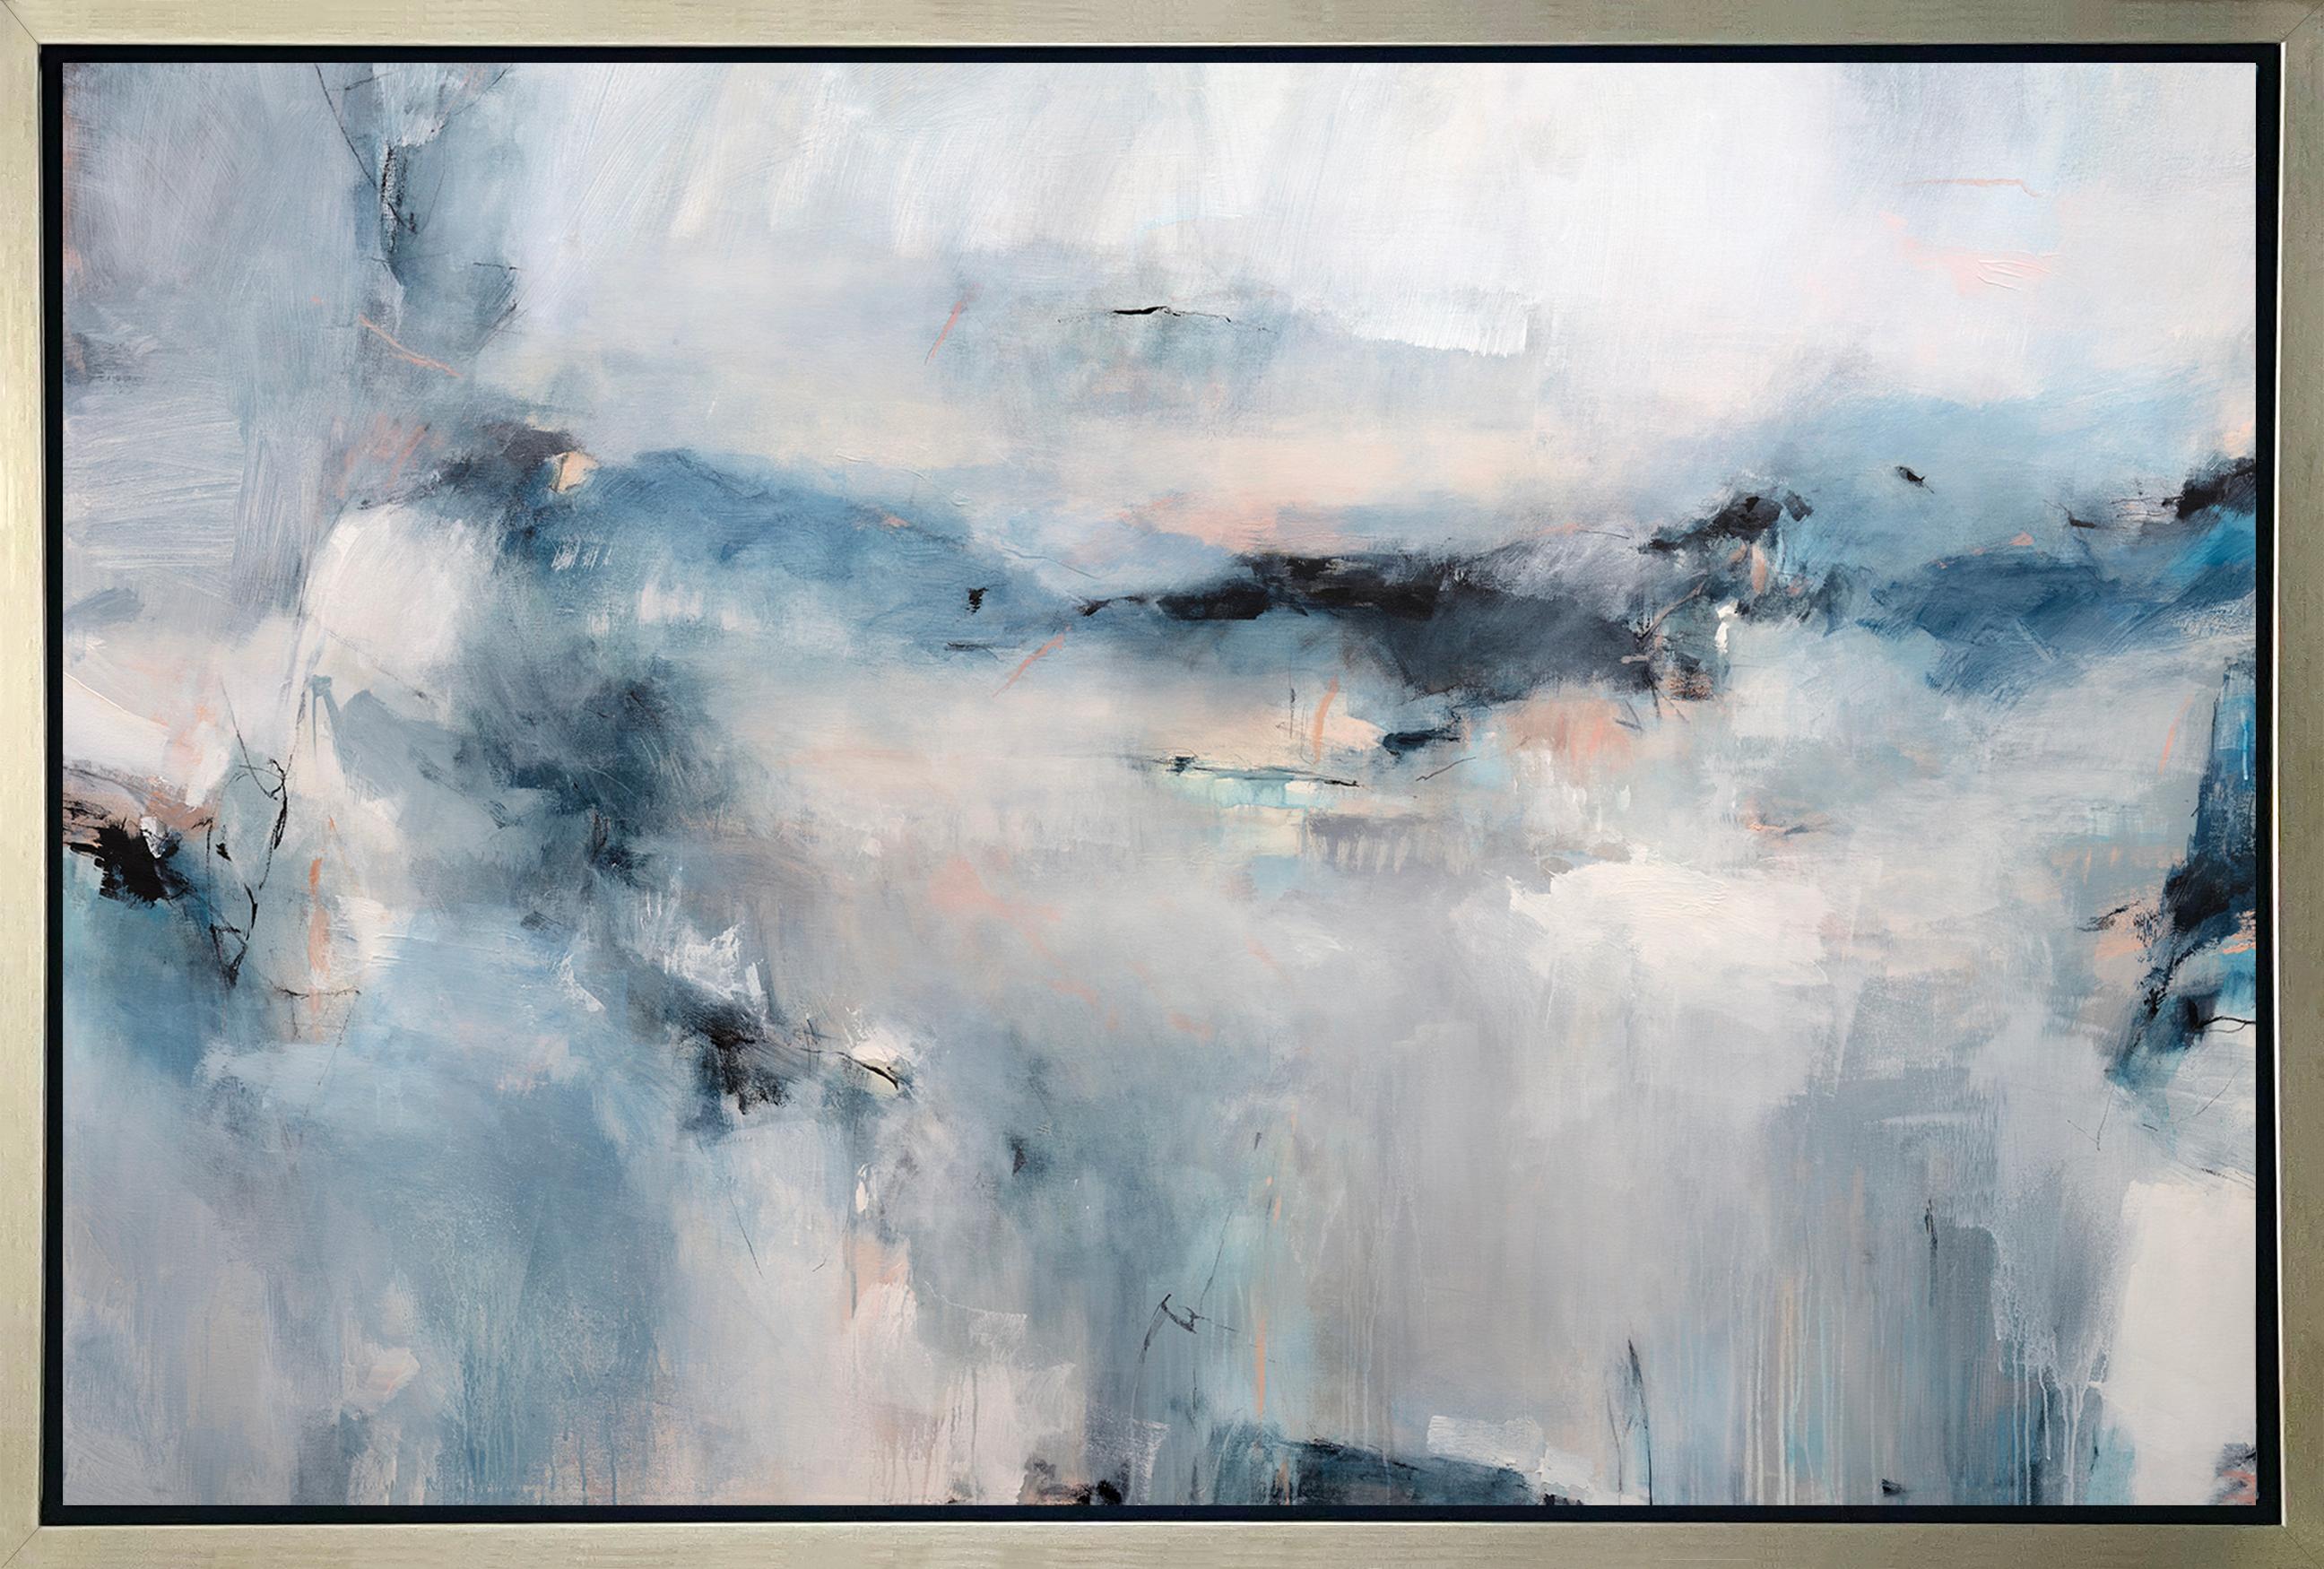 Kelly Rossetti Abstract Print - "Sweet Unknown, " Framed Limited Edition Giclee Print, 48" x 72"